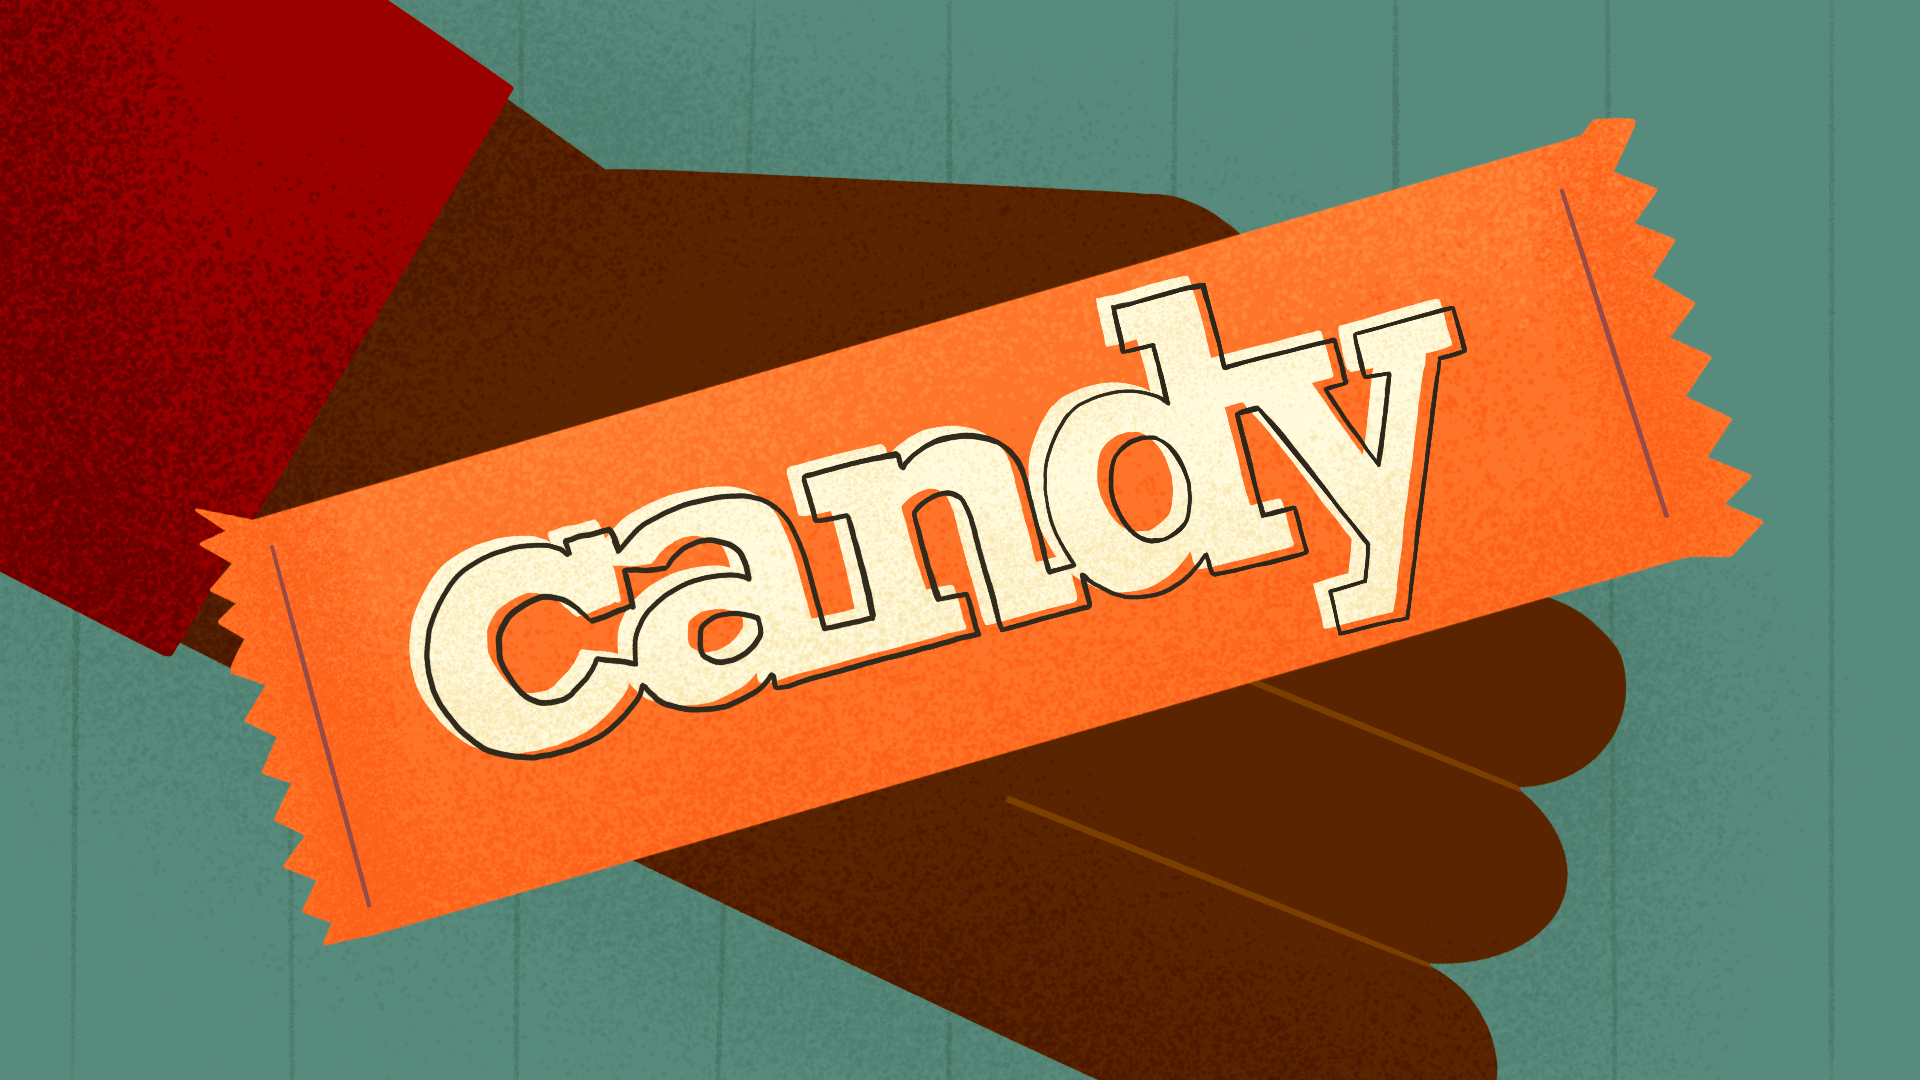 Candy shrinking into a hand